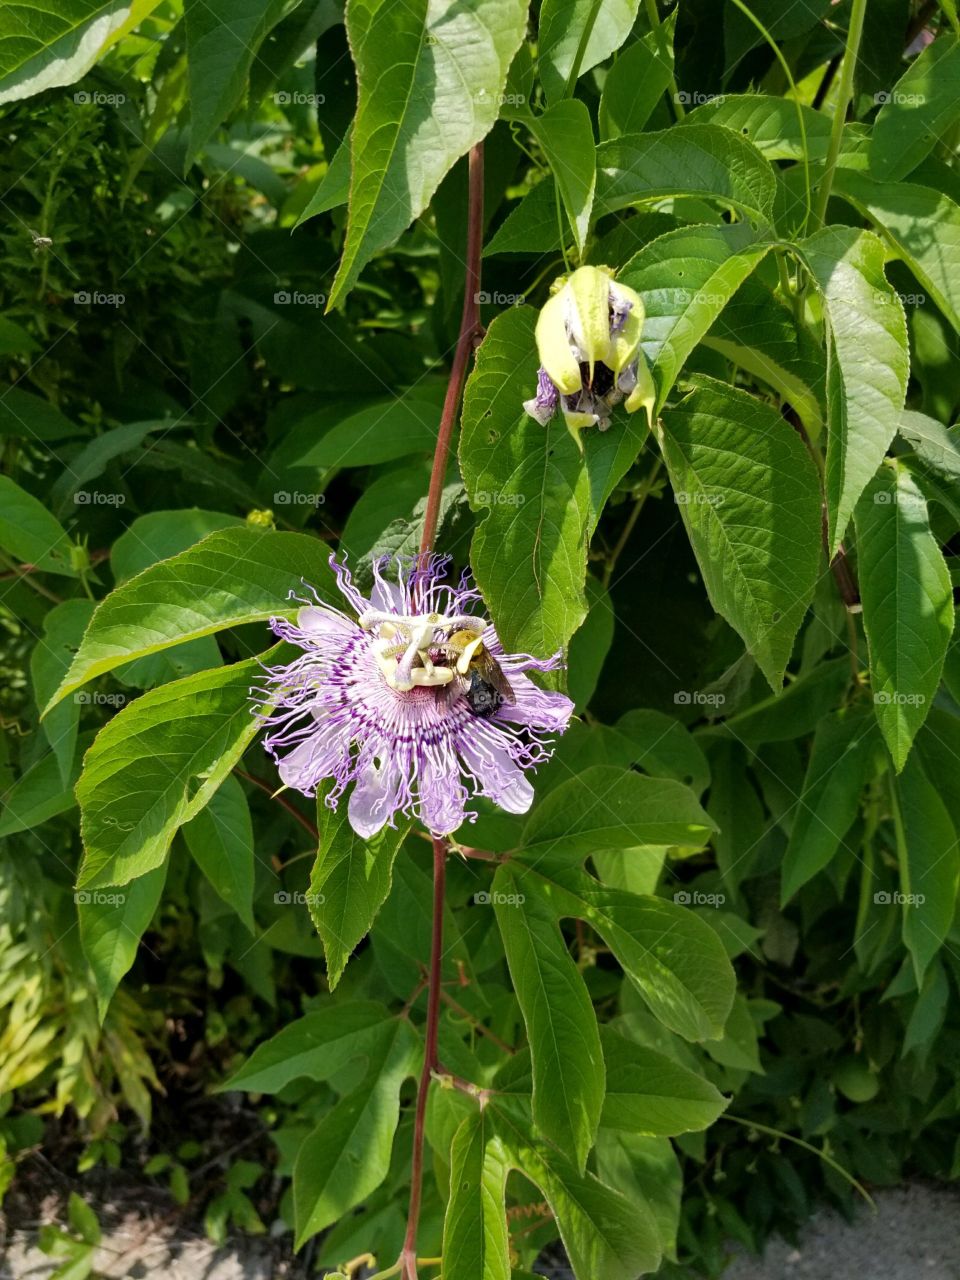 Passion flowers 